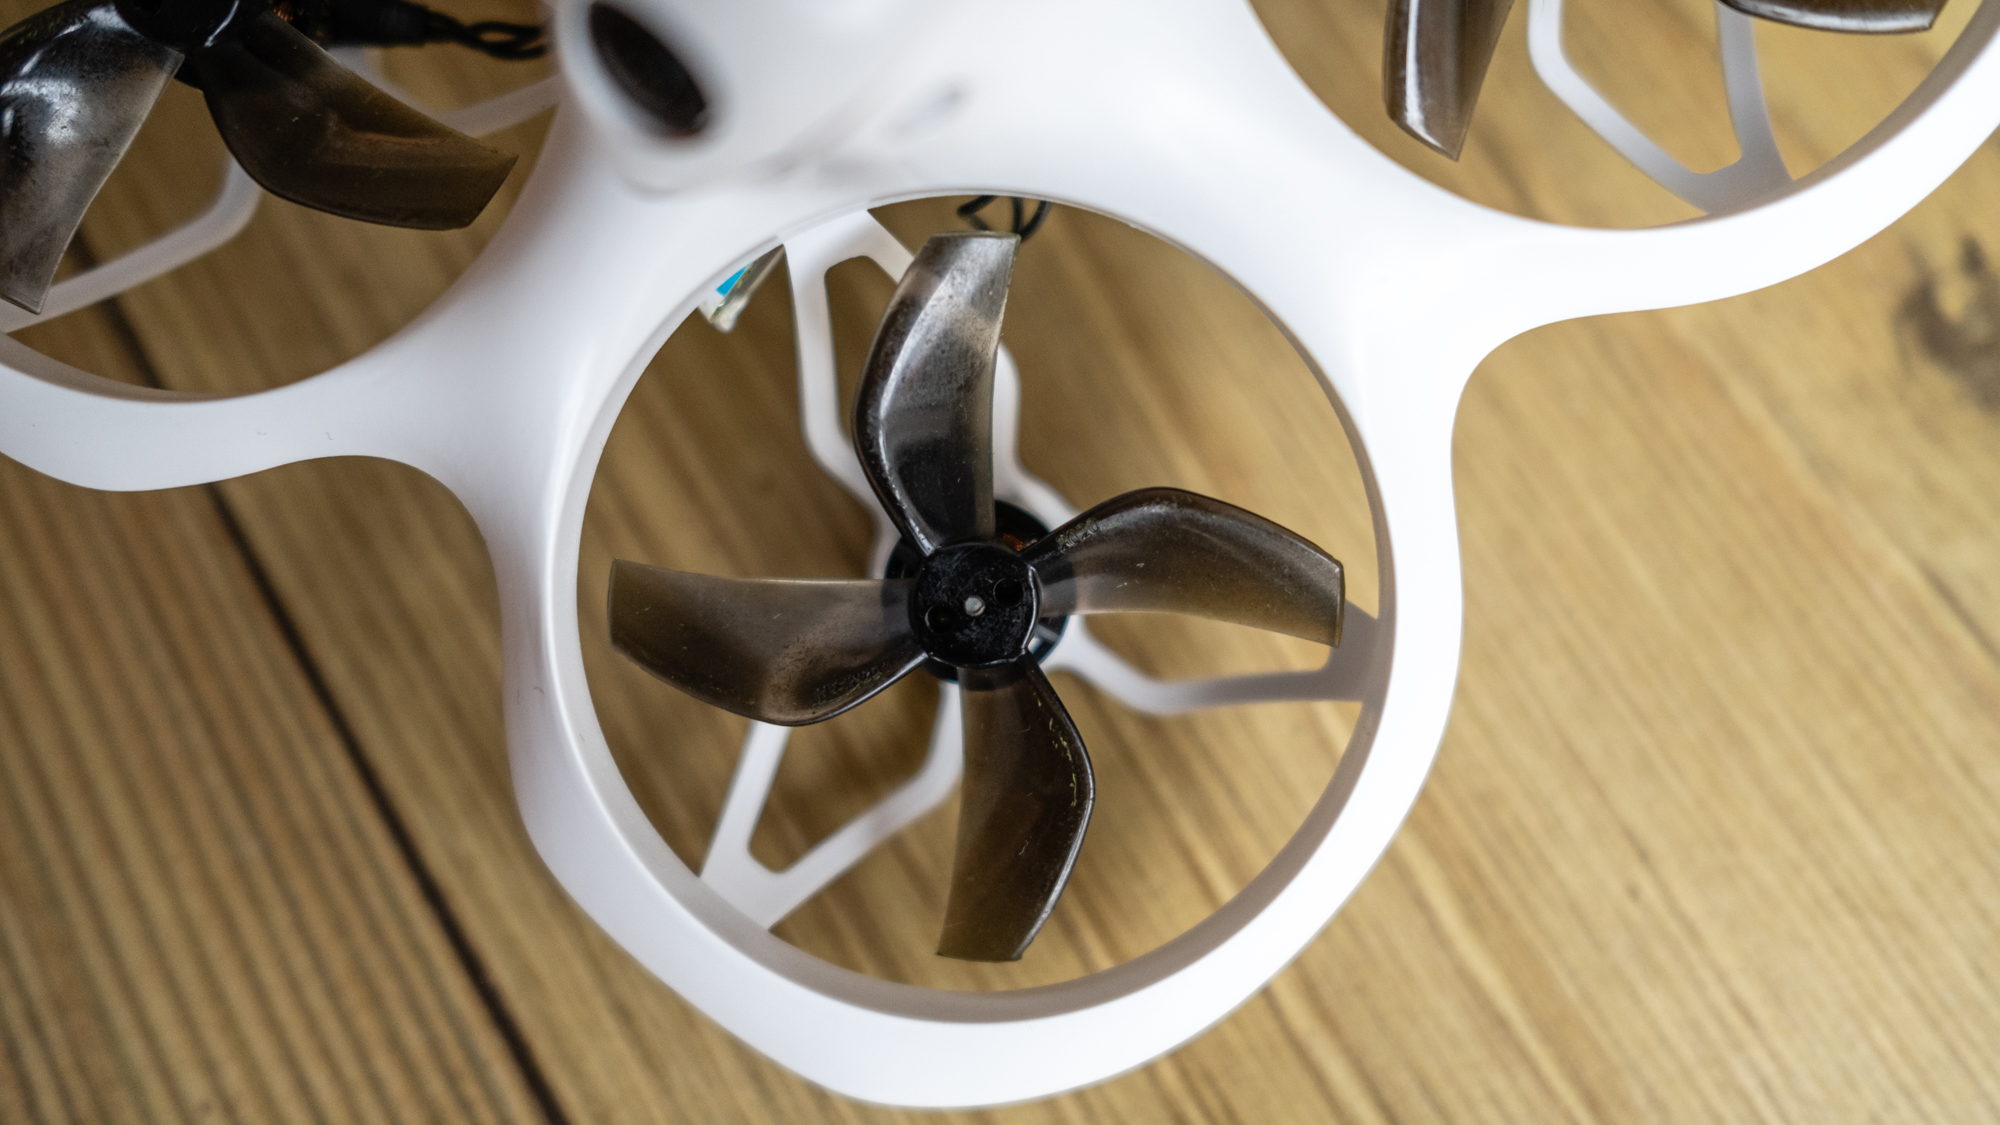 BetaFPX Cetus X drone on wooden table closeup of a single propellor